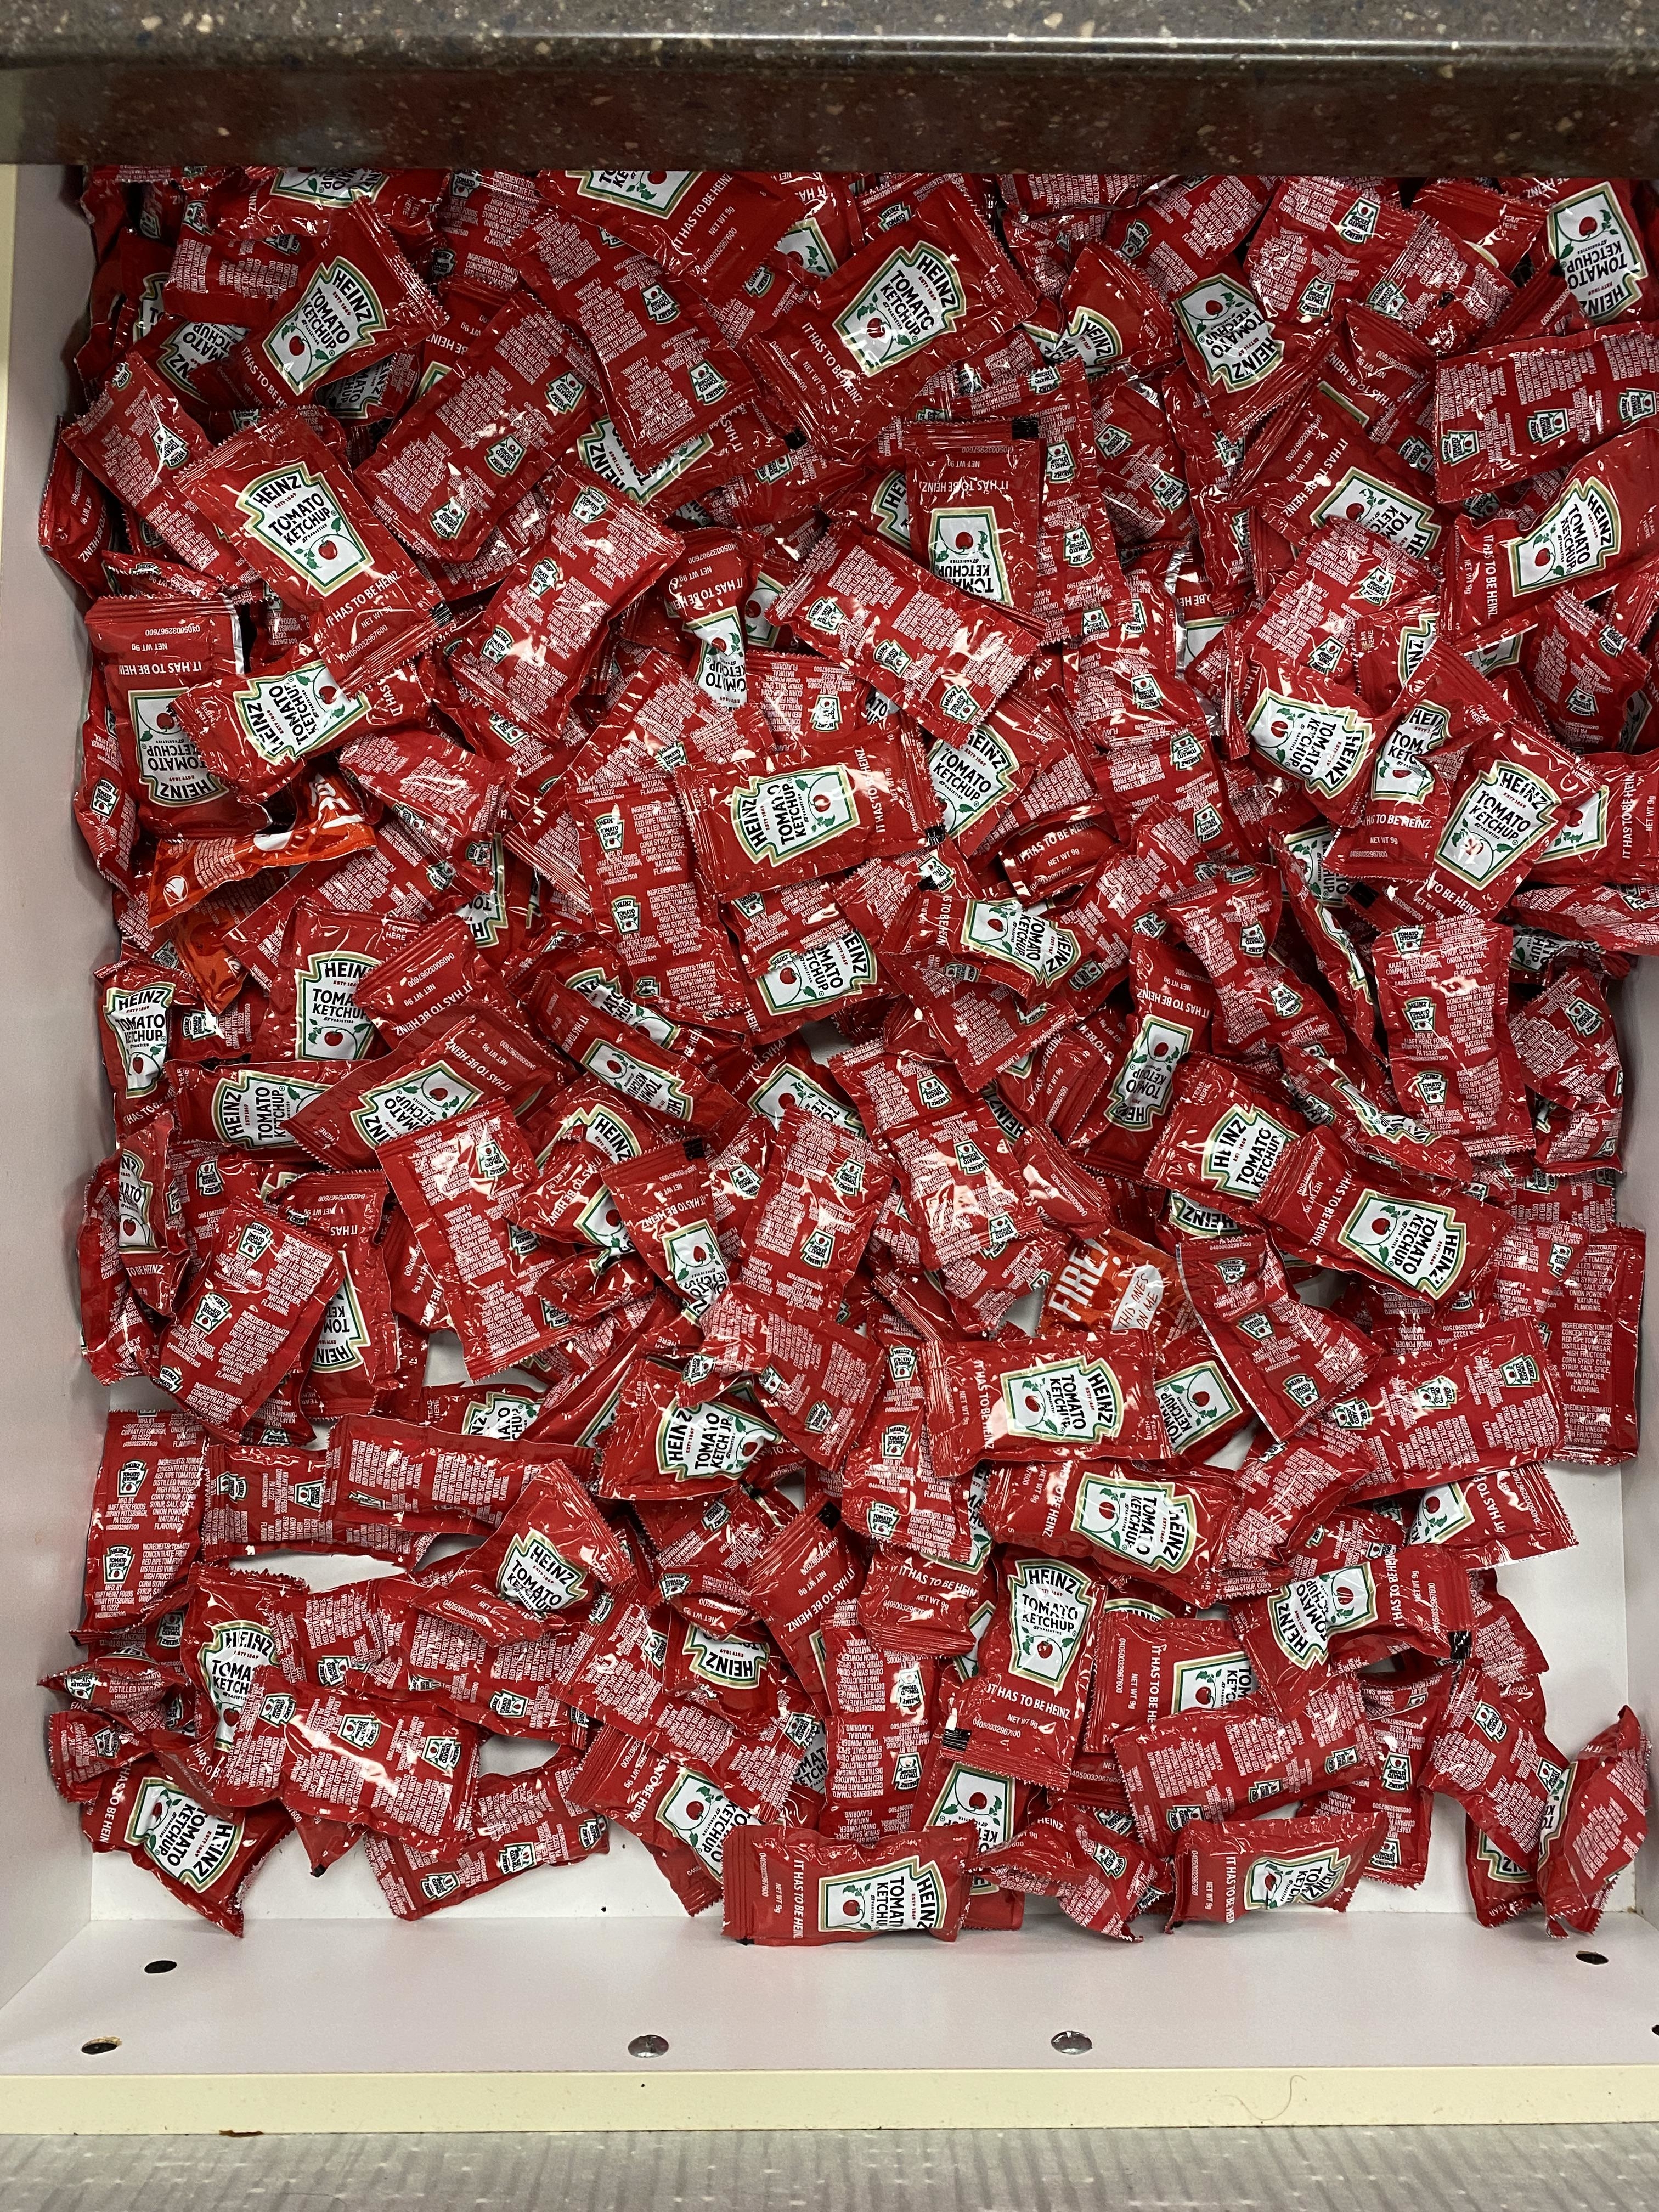 A drawer filled to the brim with Heinz tomato ketchup packets